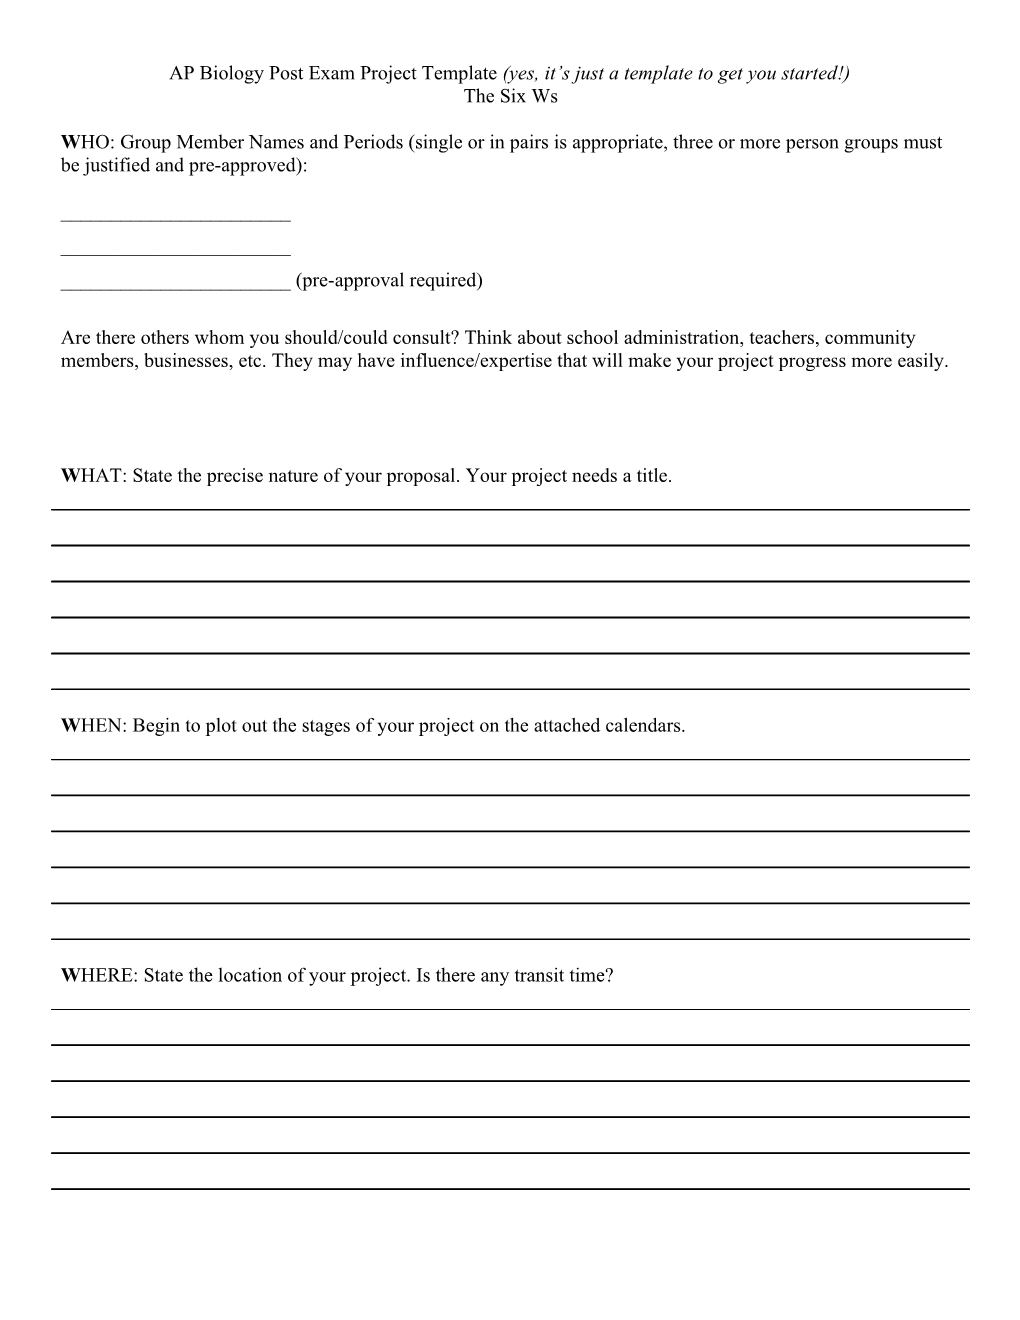 AP Biology Post Exam Project Template (Yes, It S Just a Template to Get You Started